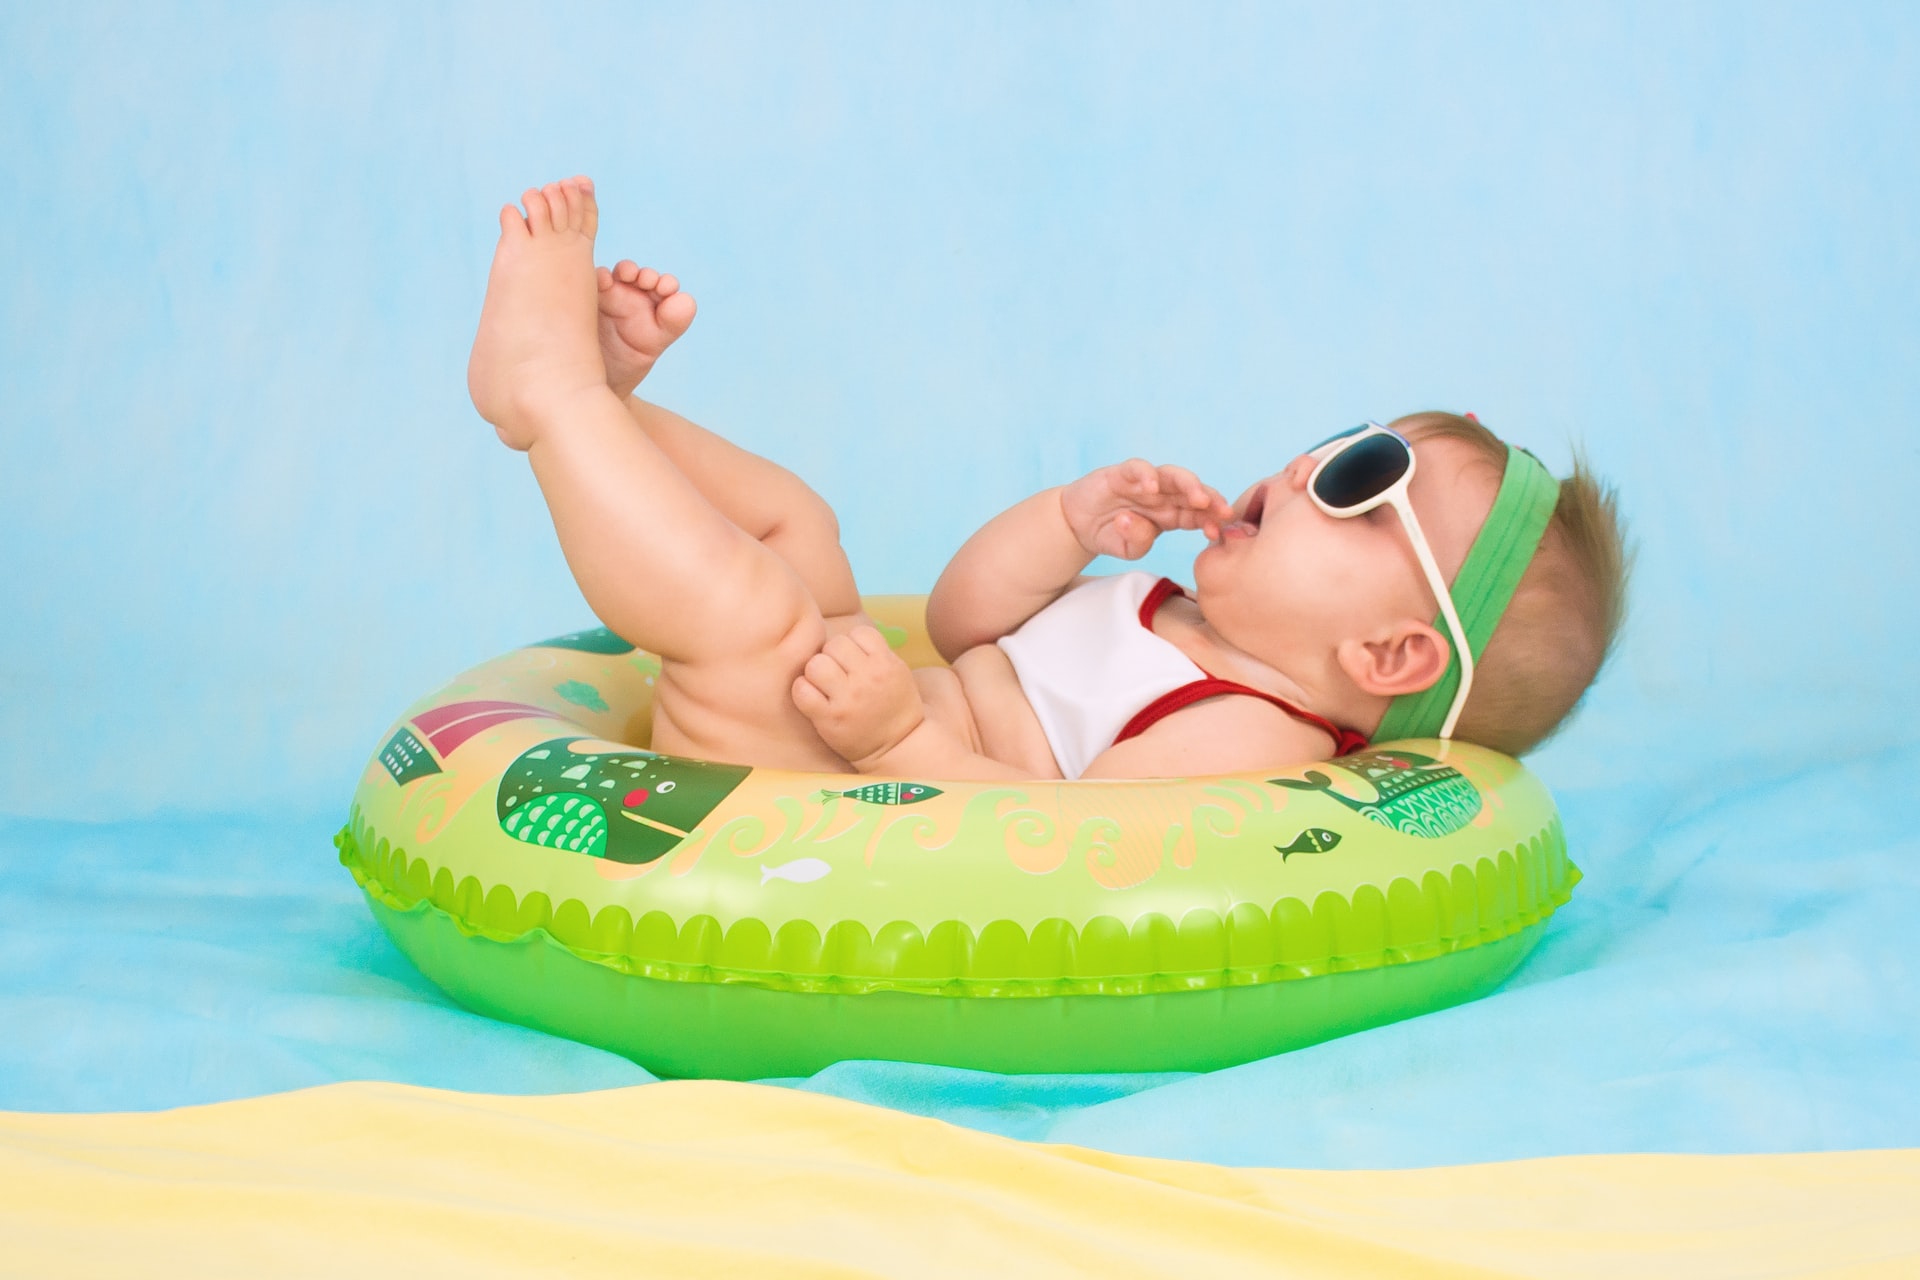 10 best reusable and disposable swimming diapers for every pool trip